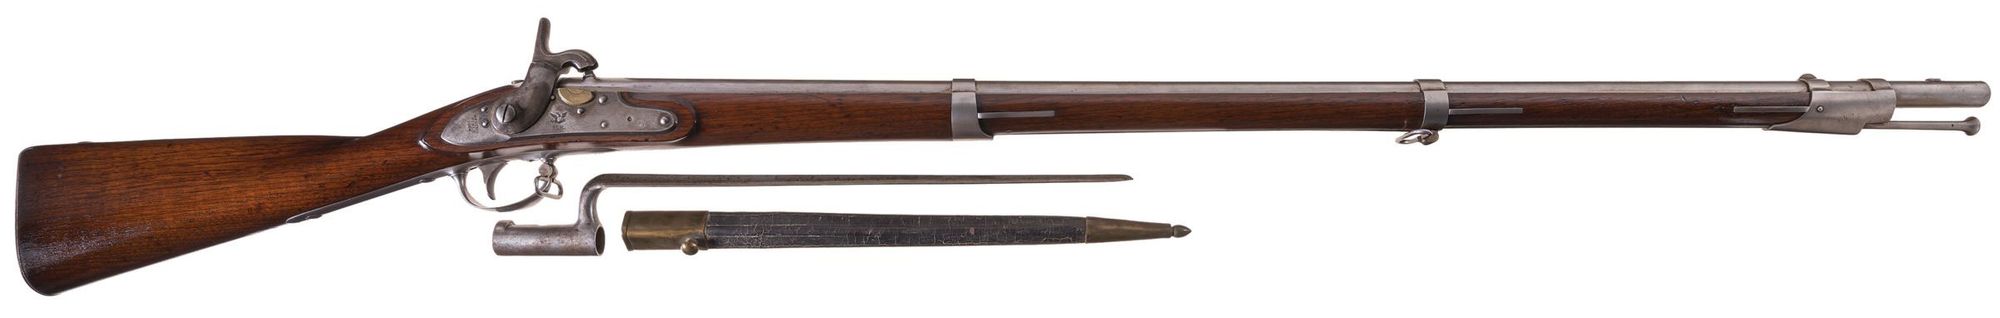 Springfield Model 1816 flintlock converted to percussion